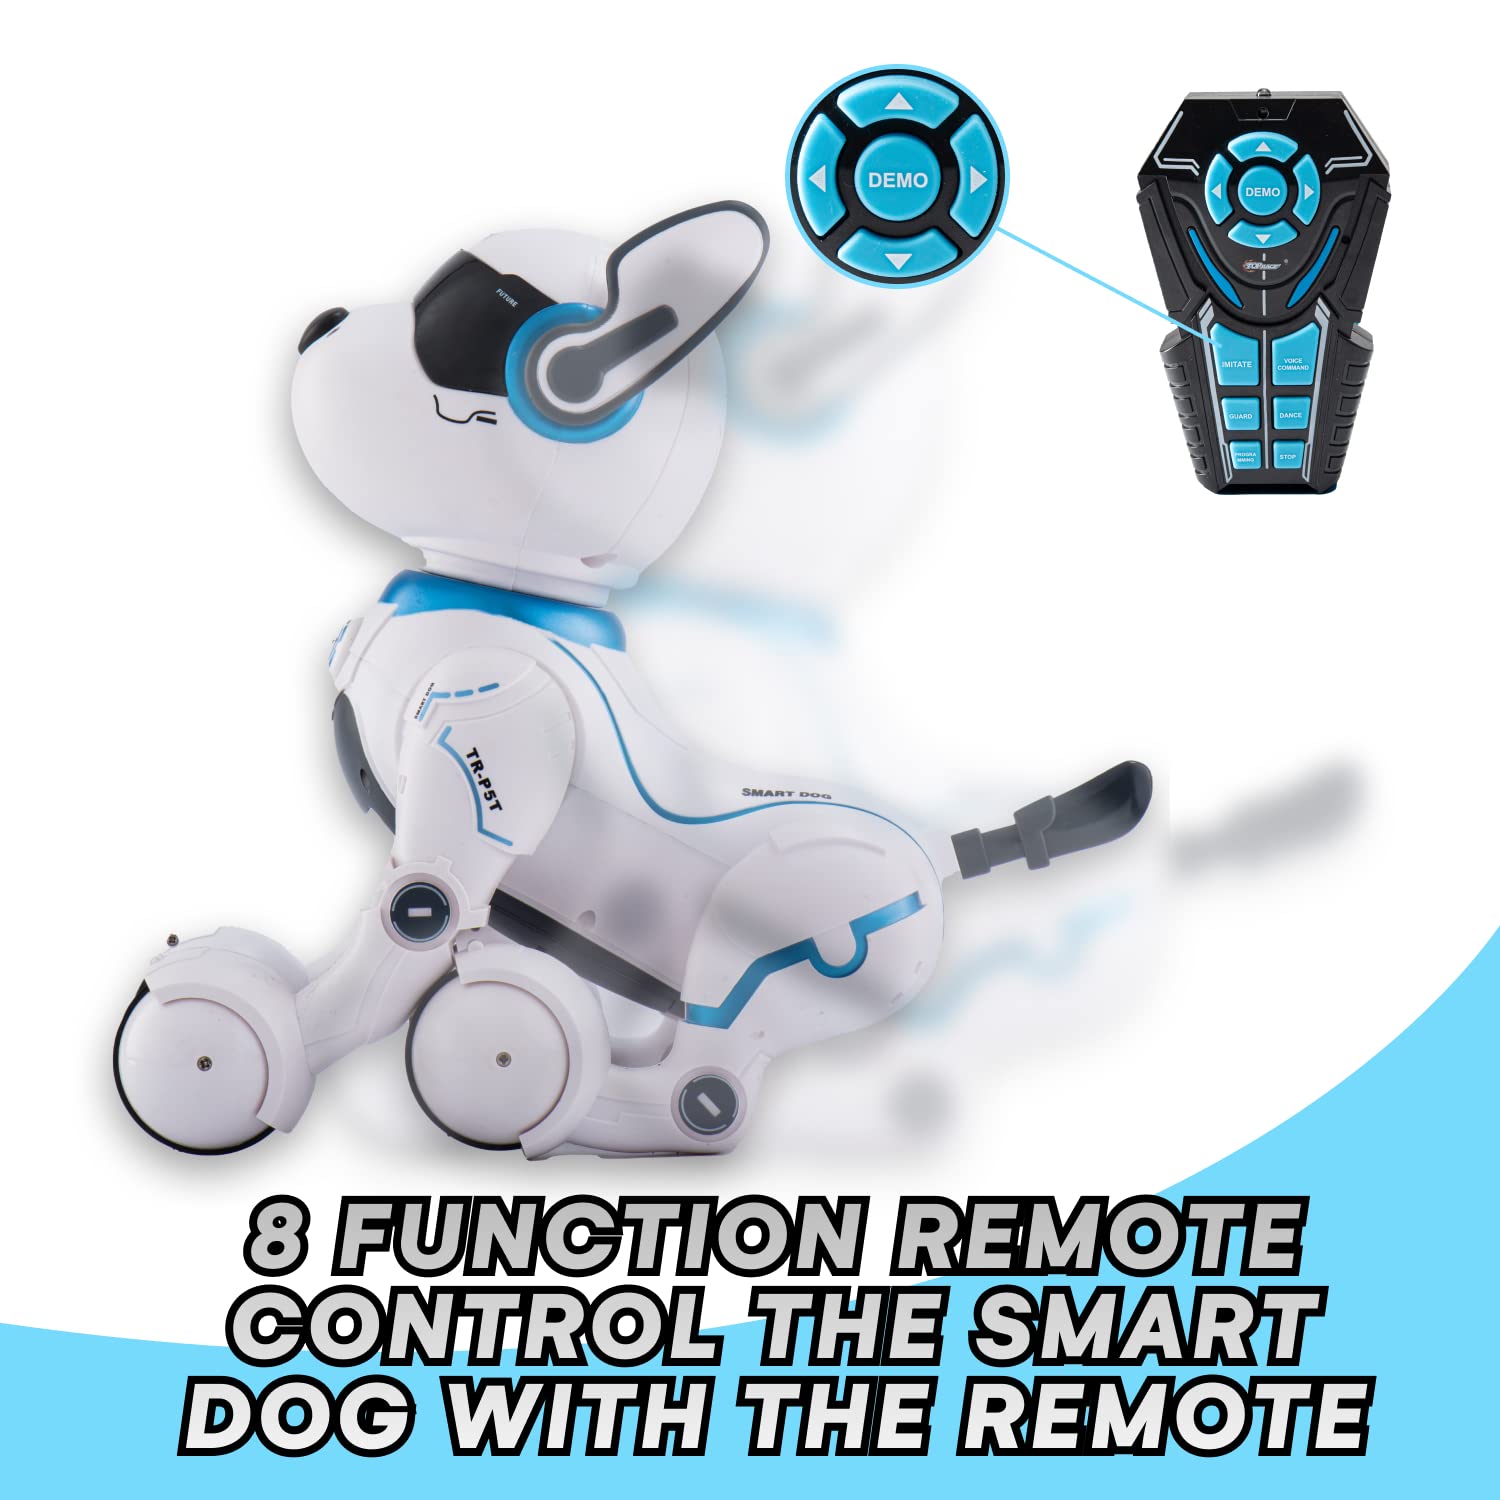 Top Race Robot Dog - Robot Dog for Kids - Remote Control Robot Pet Toy Kids 5-7 - Robot Toy with Touch Function & Voice Control - Smart Programmable Robotic Animal - Rechargeable RC Robot